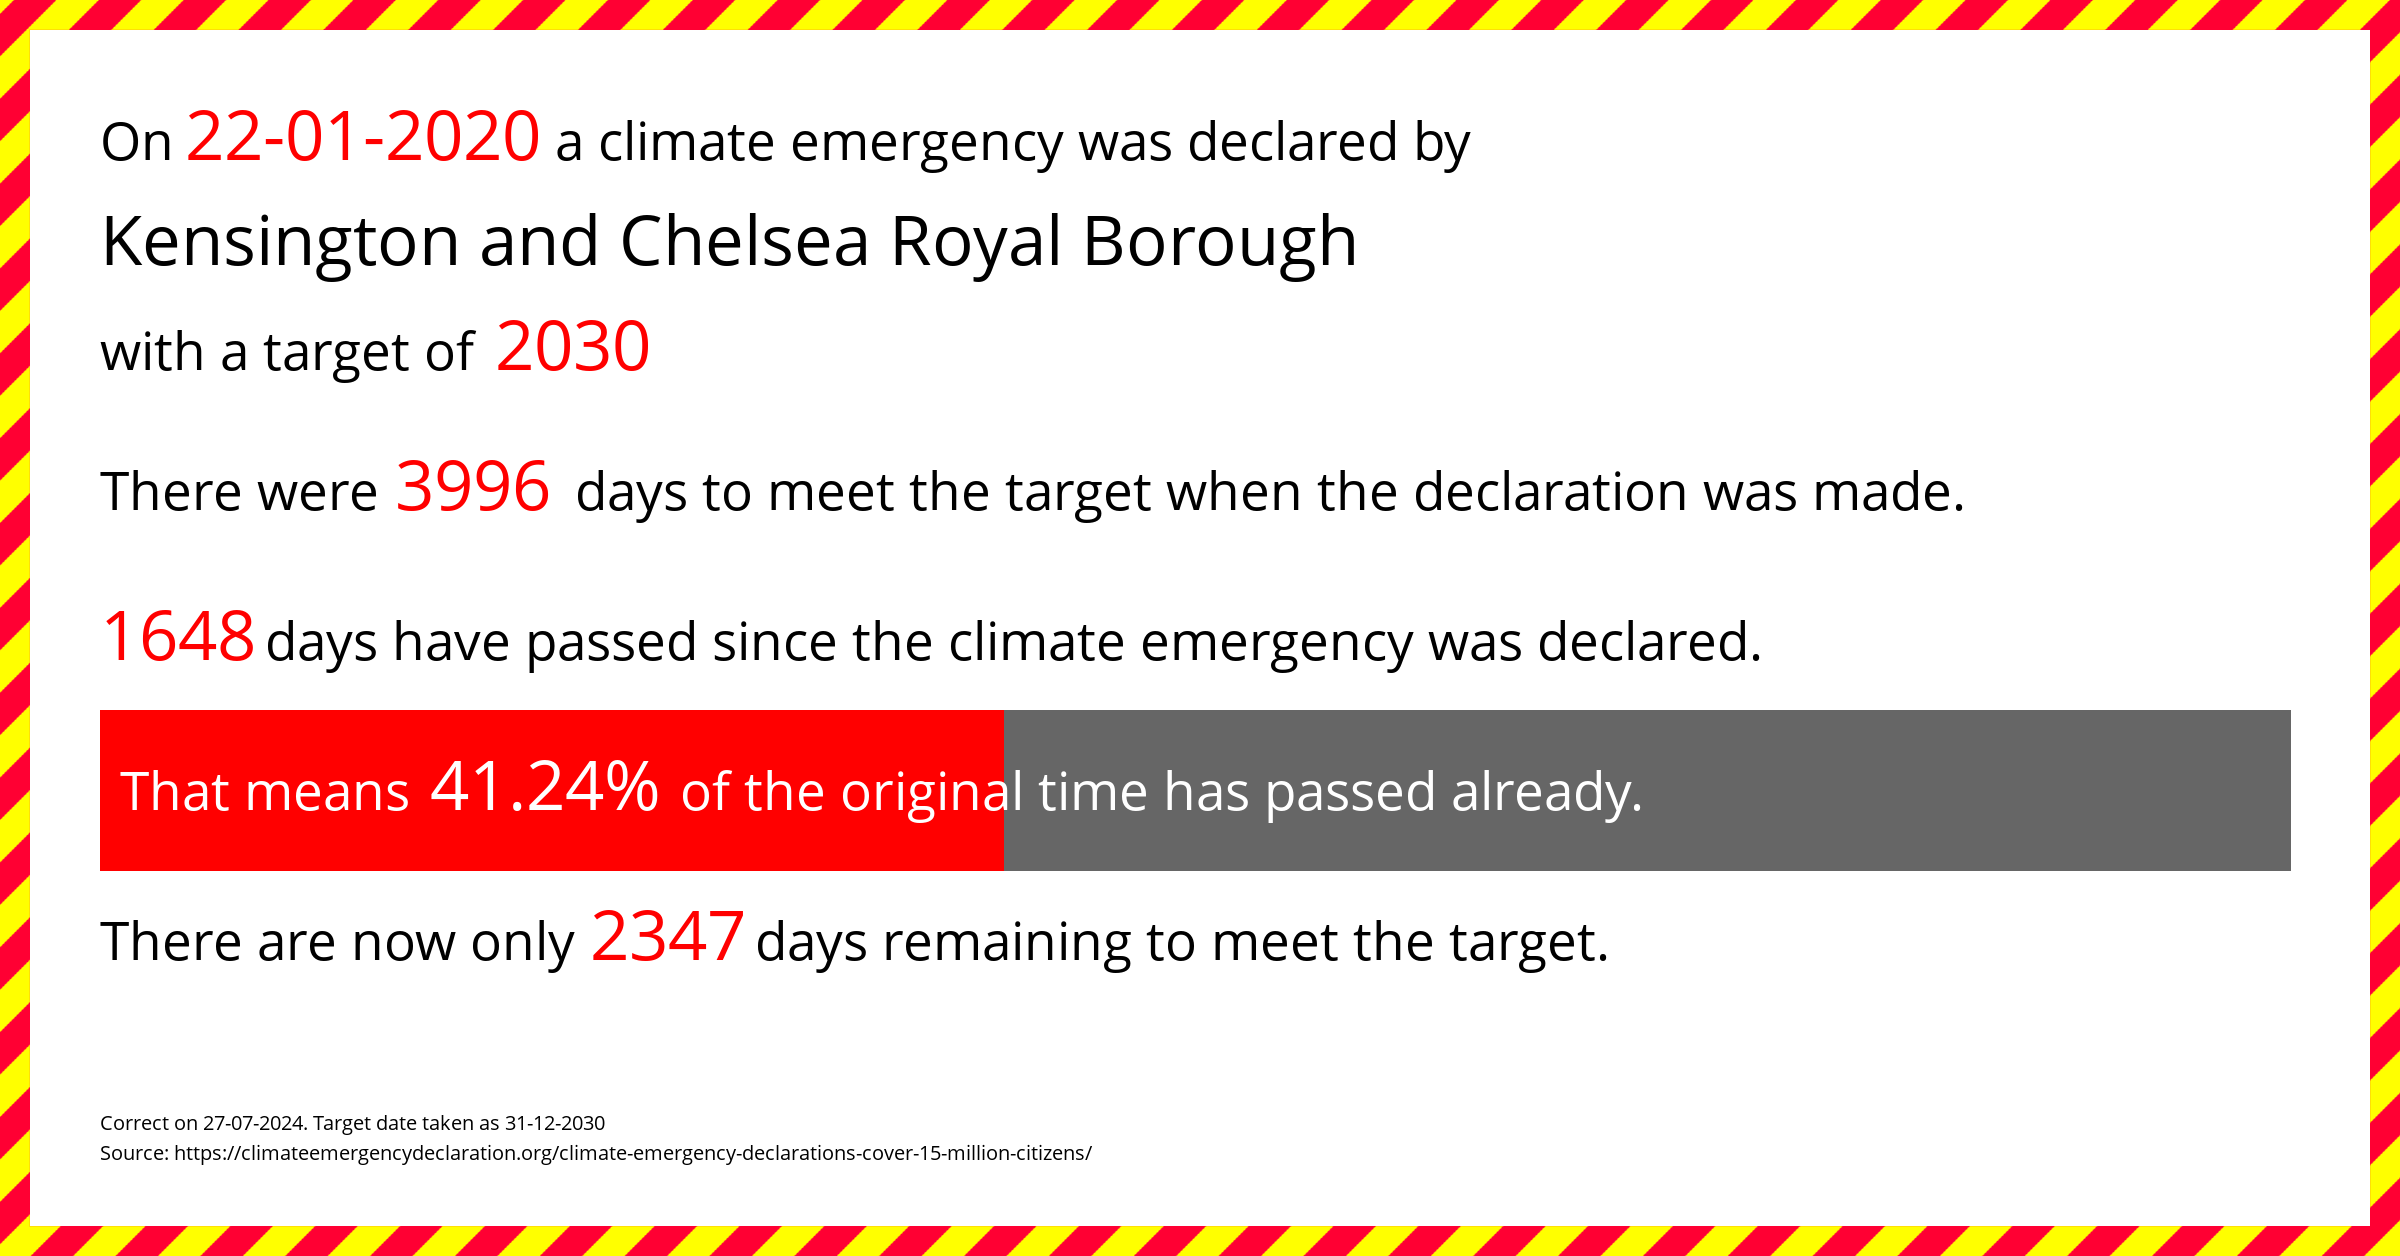 Kensington and Chelsea Royal Borough declared a Climate emergency on Wednesday 22nd January 2020, with a target of 2030.